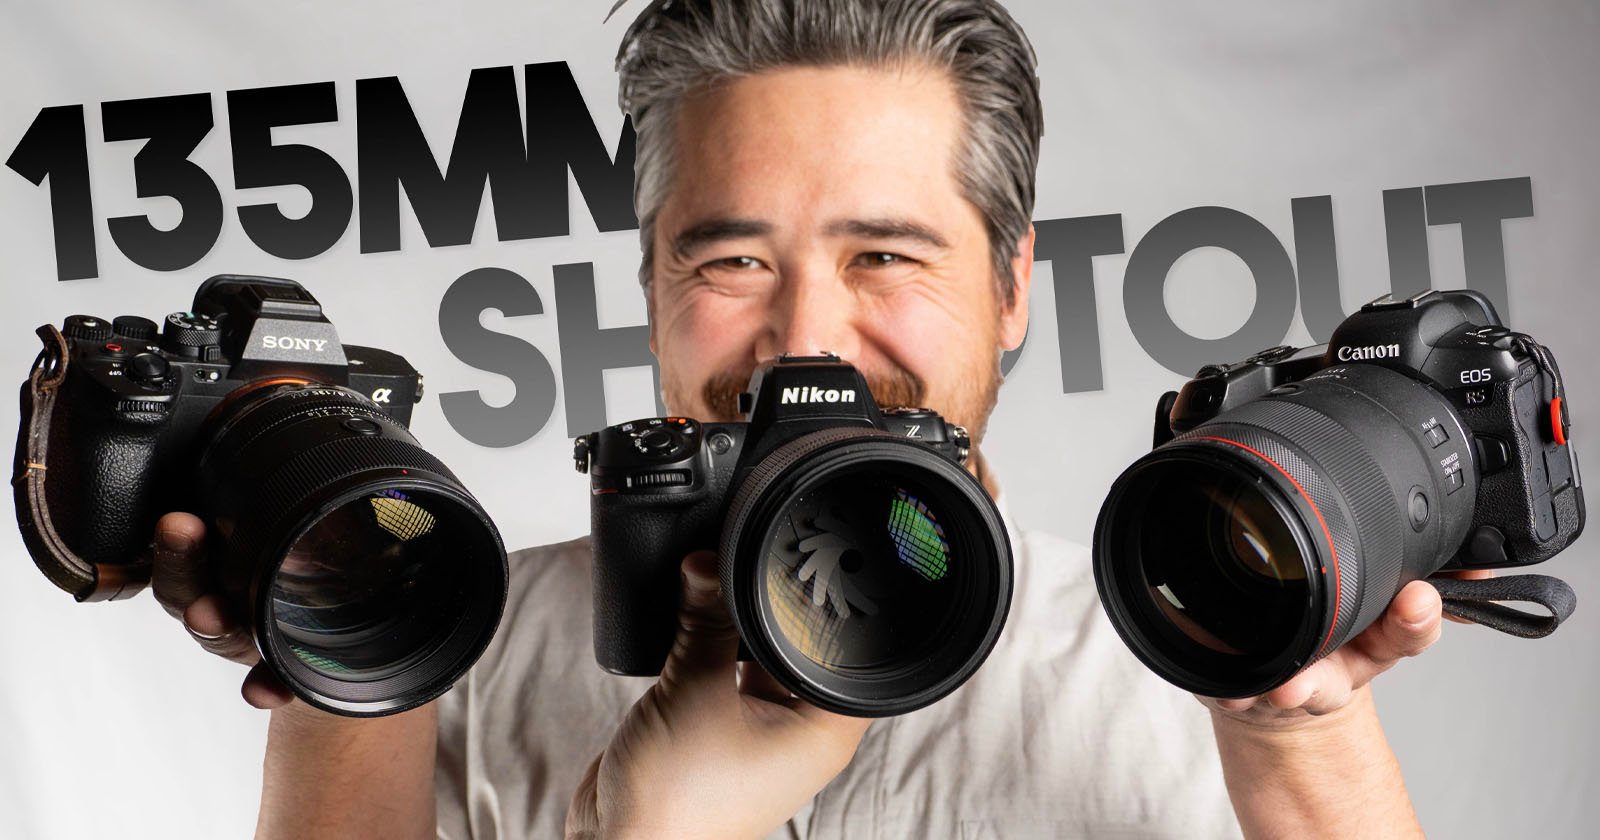 The Battle of the 135mm Lenses: Which Lens Takes the Portrait Podium?